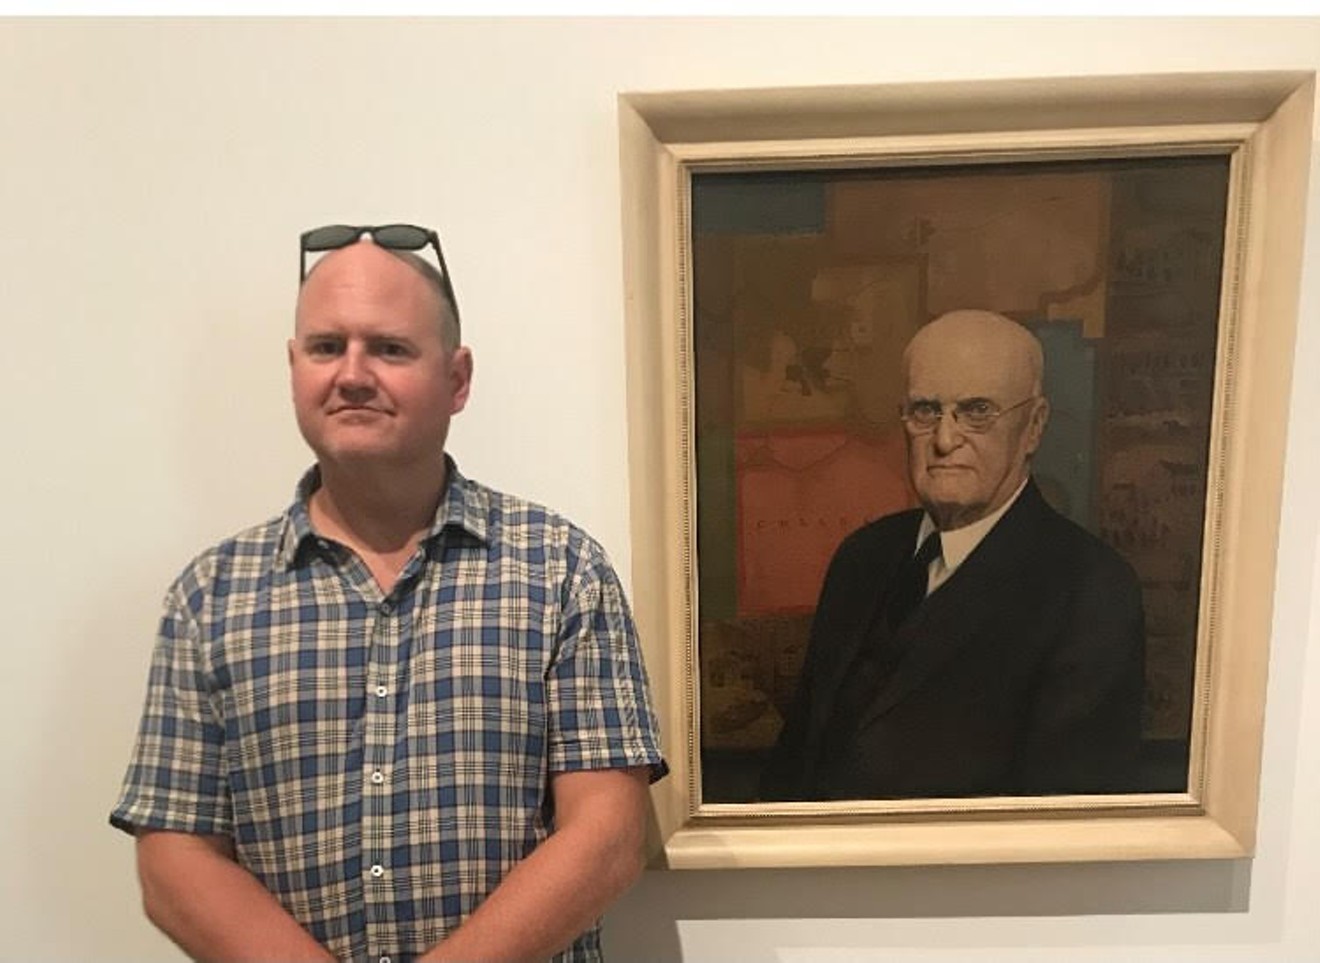 Pete Turner by a portrait of his great-great-grandfather, painted by Grant Wood.